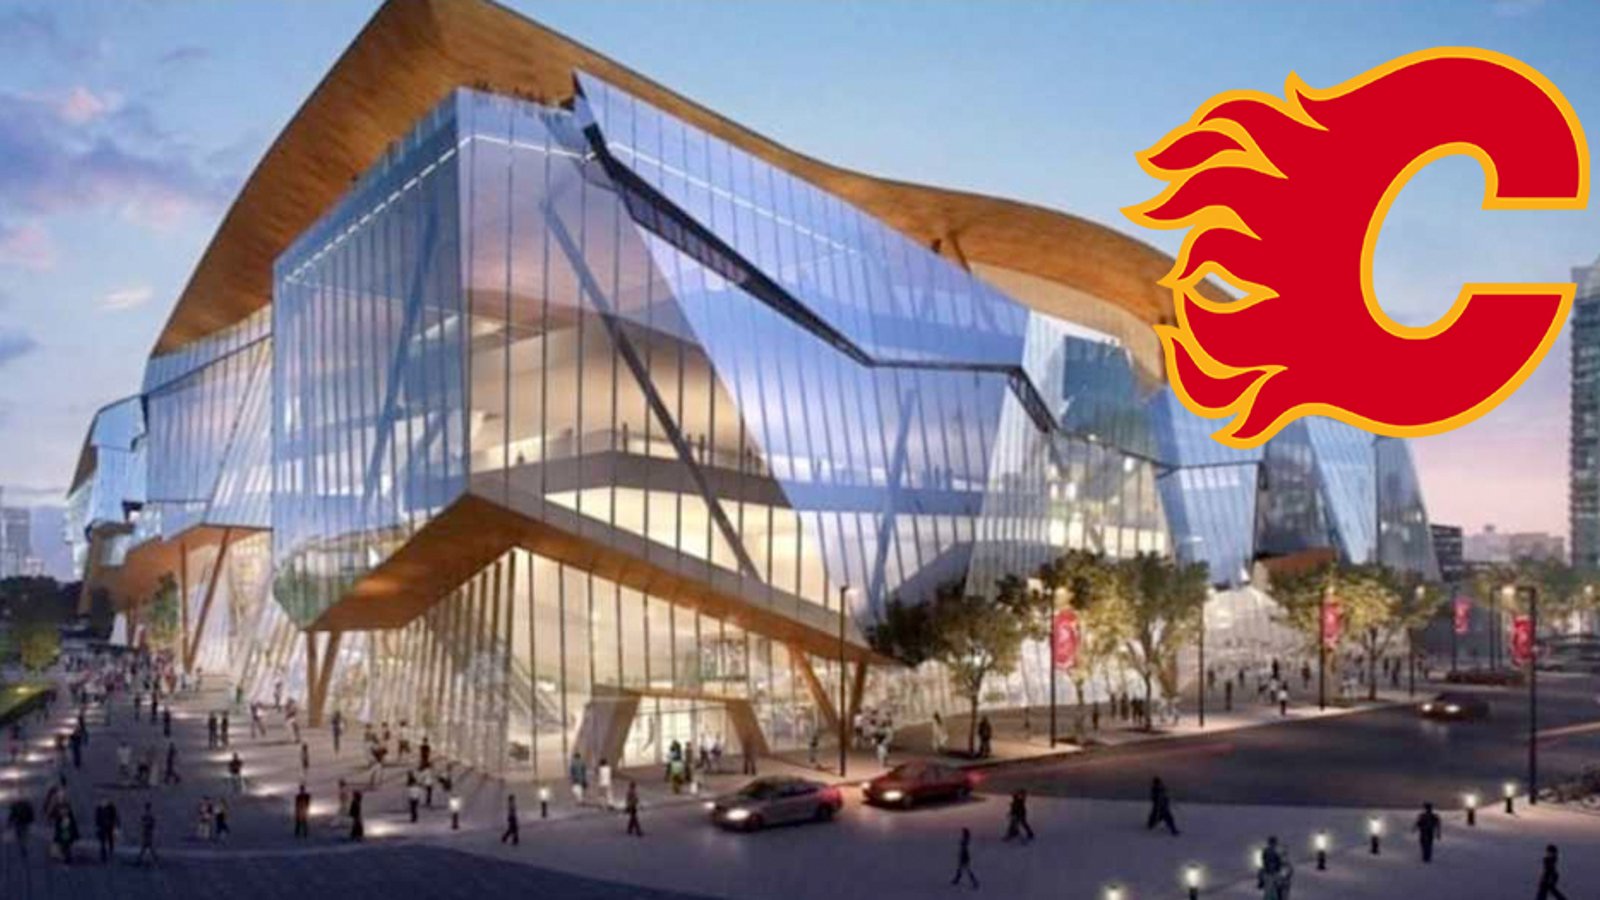 Work stops on Flames' new arena after the team asks taxpayers for another $70 million